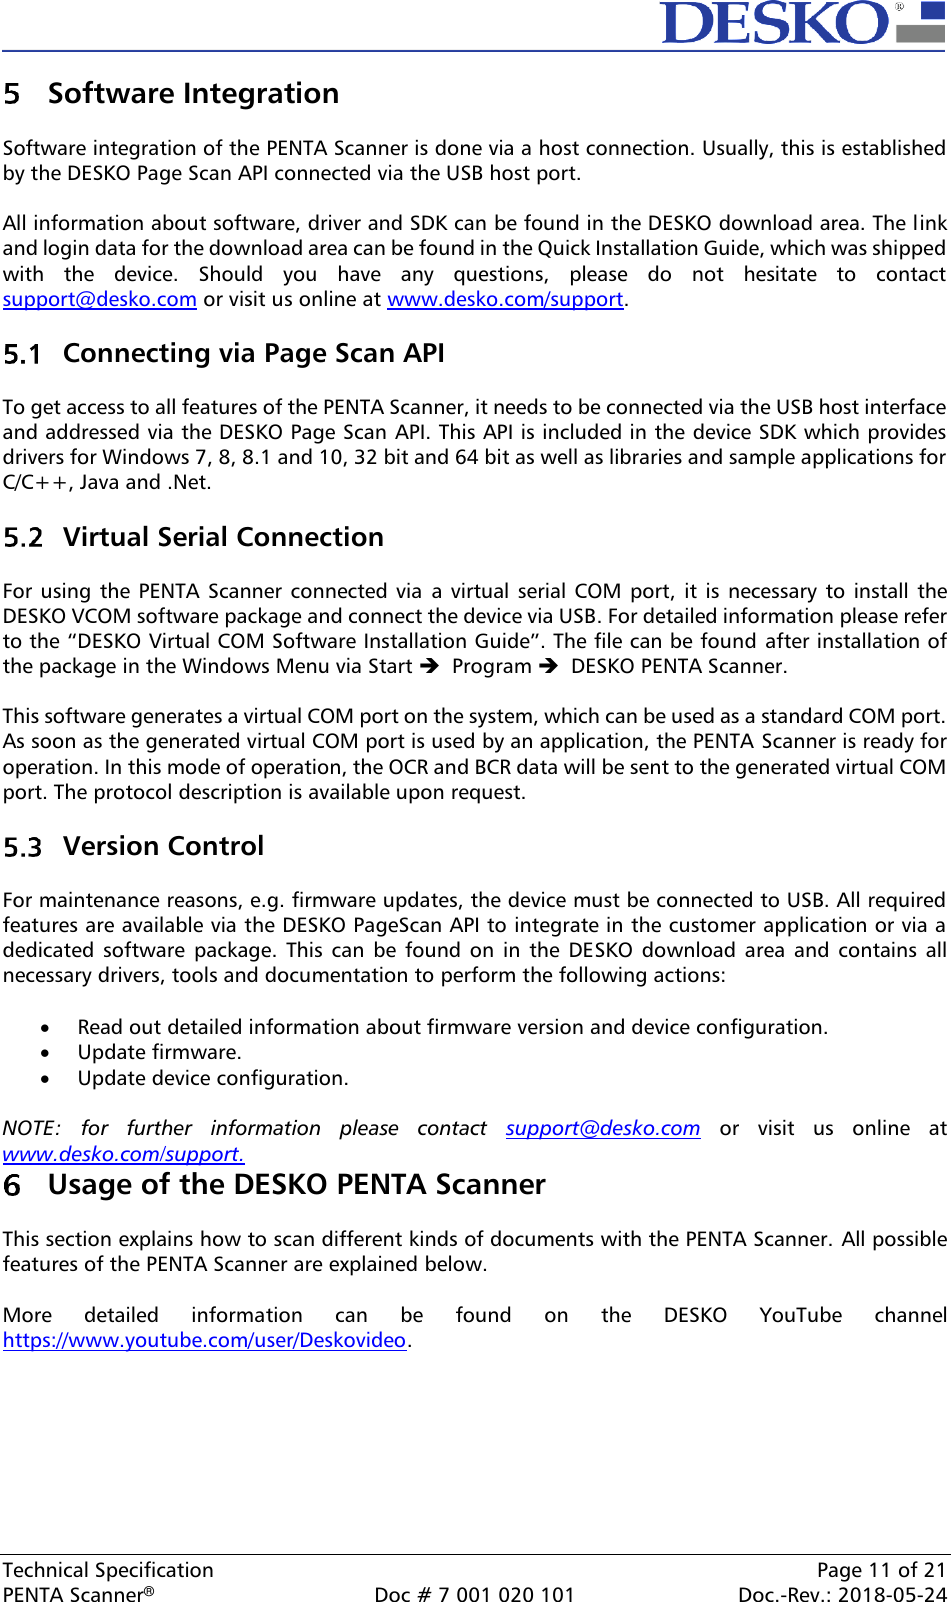  Technical Specification    Page 11 of 21 PENTA Scanner®  Doc # 7 001 020 101  Doc.-Rev.: 2018-05-24  Software Integration  Software integration of the PENTA Scanner is done via a host connection. Usually, this is established by the DESKO Page Scan API connected via the USB host port.  All information about software, driver and SDK can be found in the DESKO download area. The link and login data for the download area can be found in the Quick Installation Guide, which was shipped with  the  device.  Should  you  have  any  questions,  please  do  not  hesitate  to  contact support@desko.com or visit us online at www.desko.com/support.    Connecting via Page Scan API  To get access to all features of the PENTA Scanner, it needs to be connected via the USB host interface and addressed via the DESKO Page Scan API. This API is included in the device SDK which provides drivers for Windows 7, 8, 8.1 and 10, 32 bit and 64 bit as well as libraries and sample applications for C/C++, Java and .Net.   Virtual Serial Connection  For  using  the PENTA  Scanner  connected  via  a  virtual  serial  COM  port, it  is  necessary to  install  the DESKO VCOM software package and connect the device via USB. For detailed information please refer to the “DESKO Virtual COM Software Installation Guide”. The file can be found after installation of the package in the Windows Menu via Start ➔  Program ➔  DESKO PENTA Scanner.  This software generates a virtual COM port on the system, which can be used as a standard COM port. As soon as the generated virtual COM port is used by an application, the PENTA Scanner is ready for operation. In this mode of operation, the OCR and BCR data will be sent to the generated virtual COM port. The protocol description is available upon request.   Version Control  For maintenance reasons, e.g. firmware updates, the device must be connected to USB. All required features are available via the DESKO PageScan API to integrate in the customer application or via a dedicated  software  package.  This can  be  found  on  in  the  DESKO  download  area  and  contains all necessary drivers, tools and documentation to perform the following actions:  • Read out detailed information about firmware version and device configuration. • Update firmware. • Update device configuration.  NOTE:  for  further  information  please  contact  support@desko.com  or  visit  us  online  at www.desko.com/support.   Usage of the DESKO PENTA Scanner  This section explains how to scan different kinds of documents with the PENTA Scanner. All possible features of the PENTA Scanner are explained below.   More  detailed  information  can  be  found  on  the  DESKO  YouTube  channel https://www.youtube.com/user/Deskovideo.    